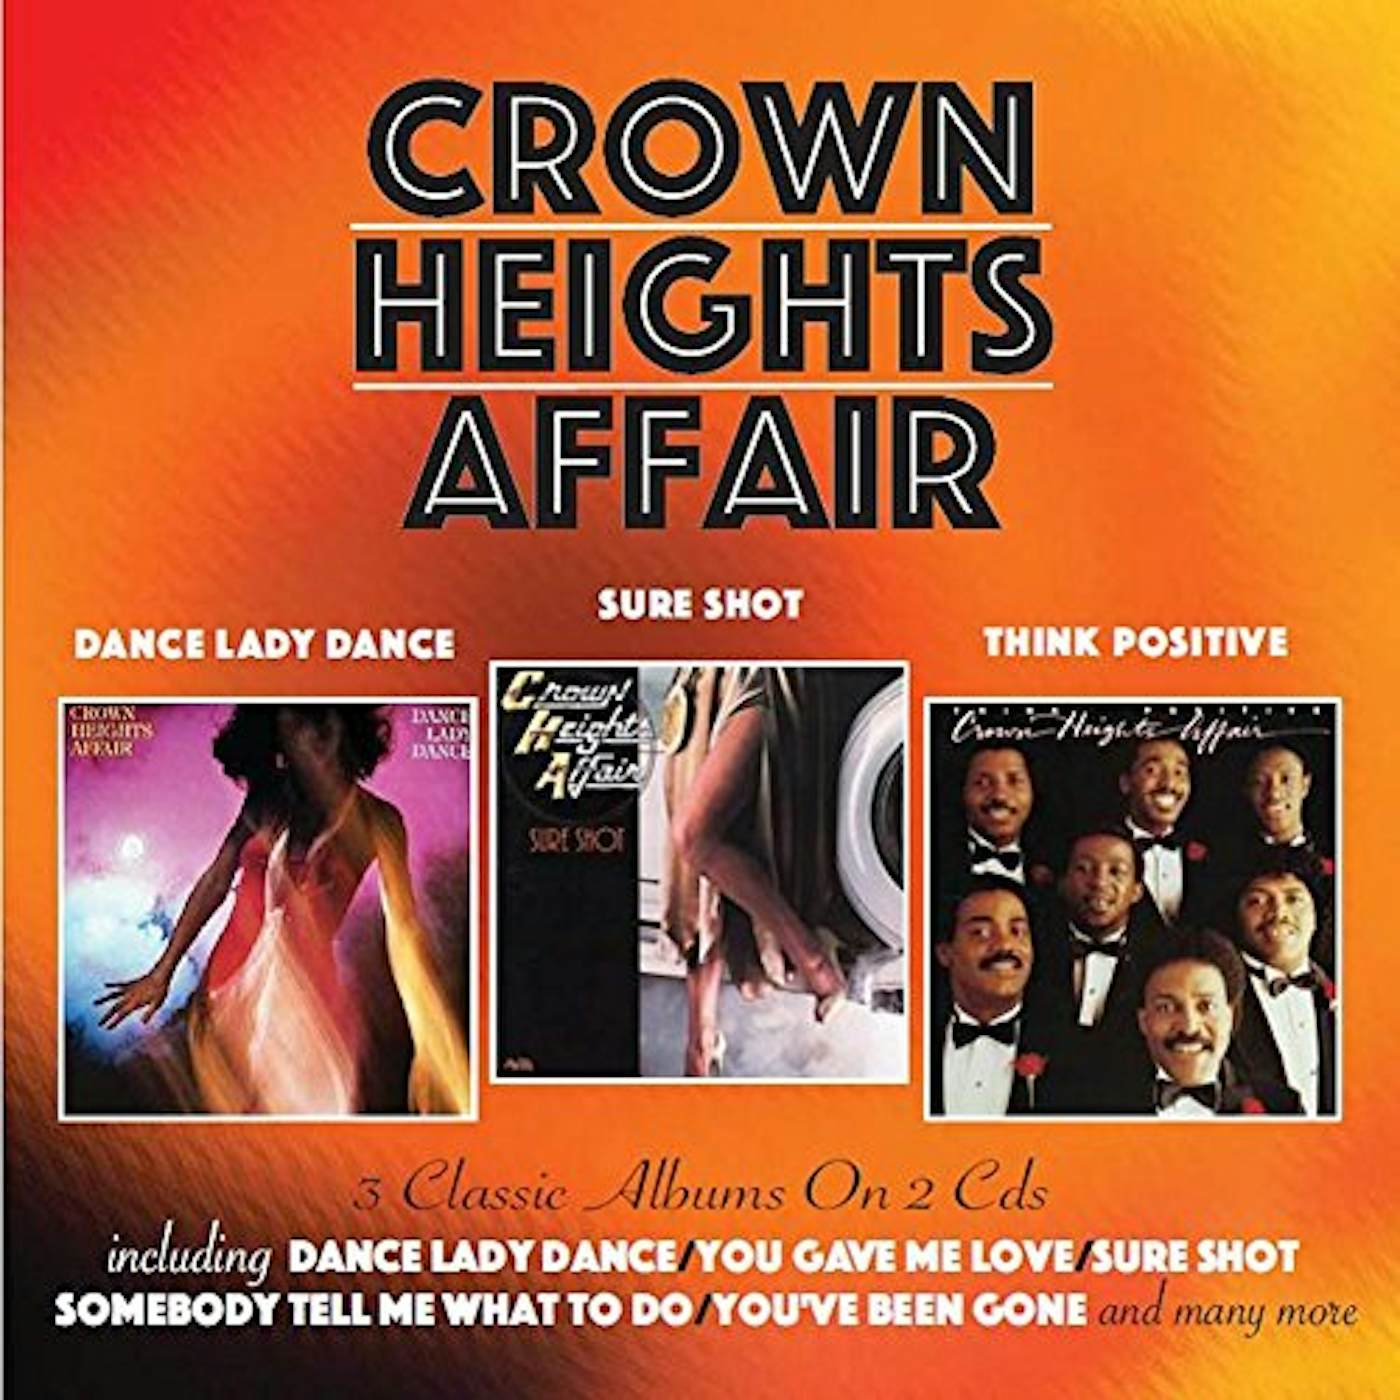 Crown Heights Affair DANCE LADY DANCE / SURE SHOT / THINK POSITIVE CD